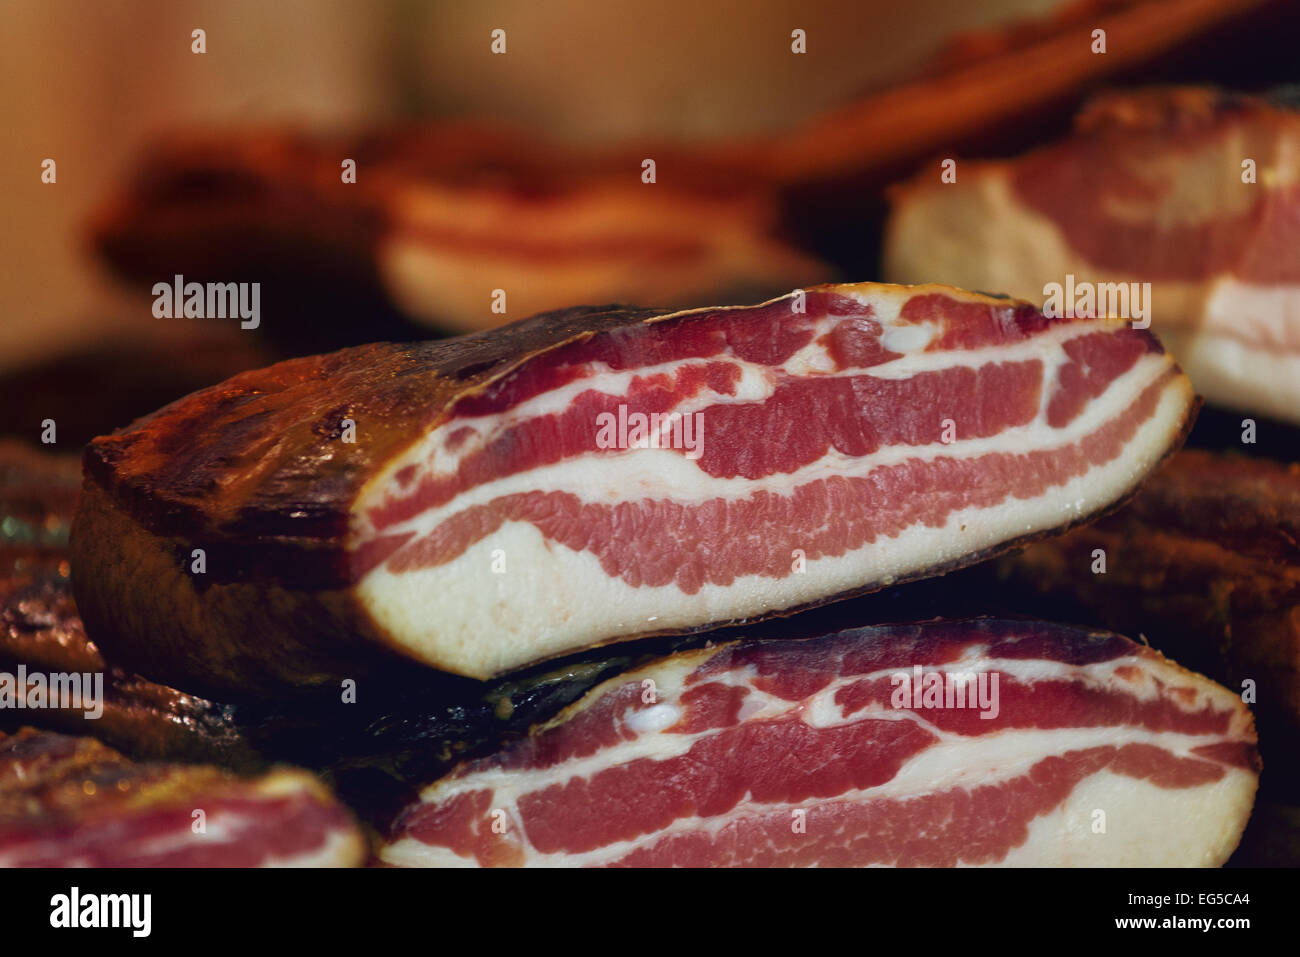 Cured Bacon Stack, Smoked and Preserved Pork Meat is Considered a Delicacy Food in Some Cultures. Stock Photo